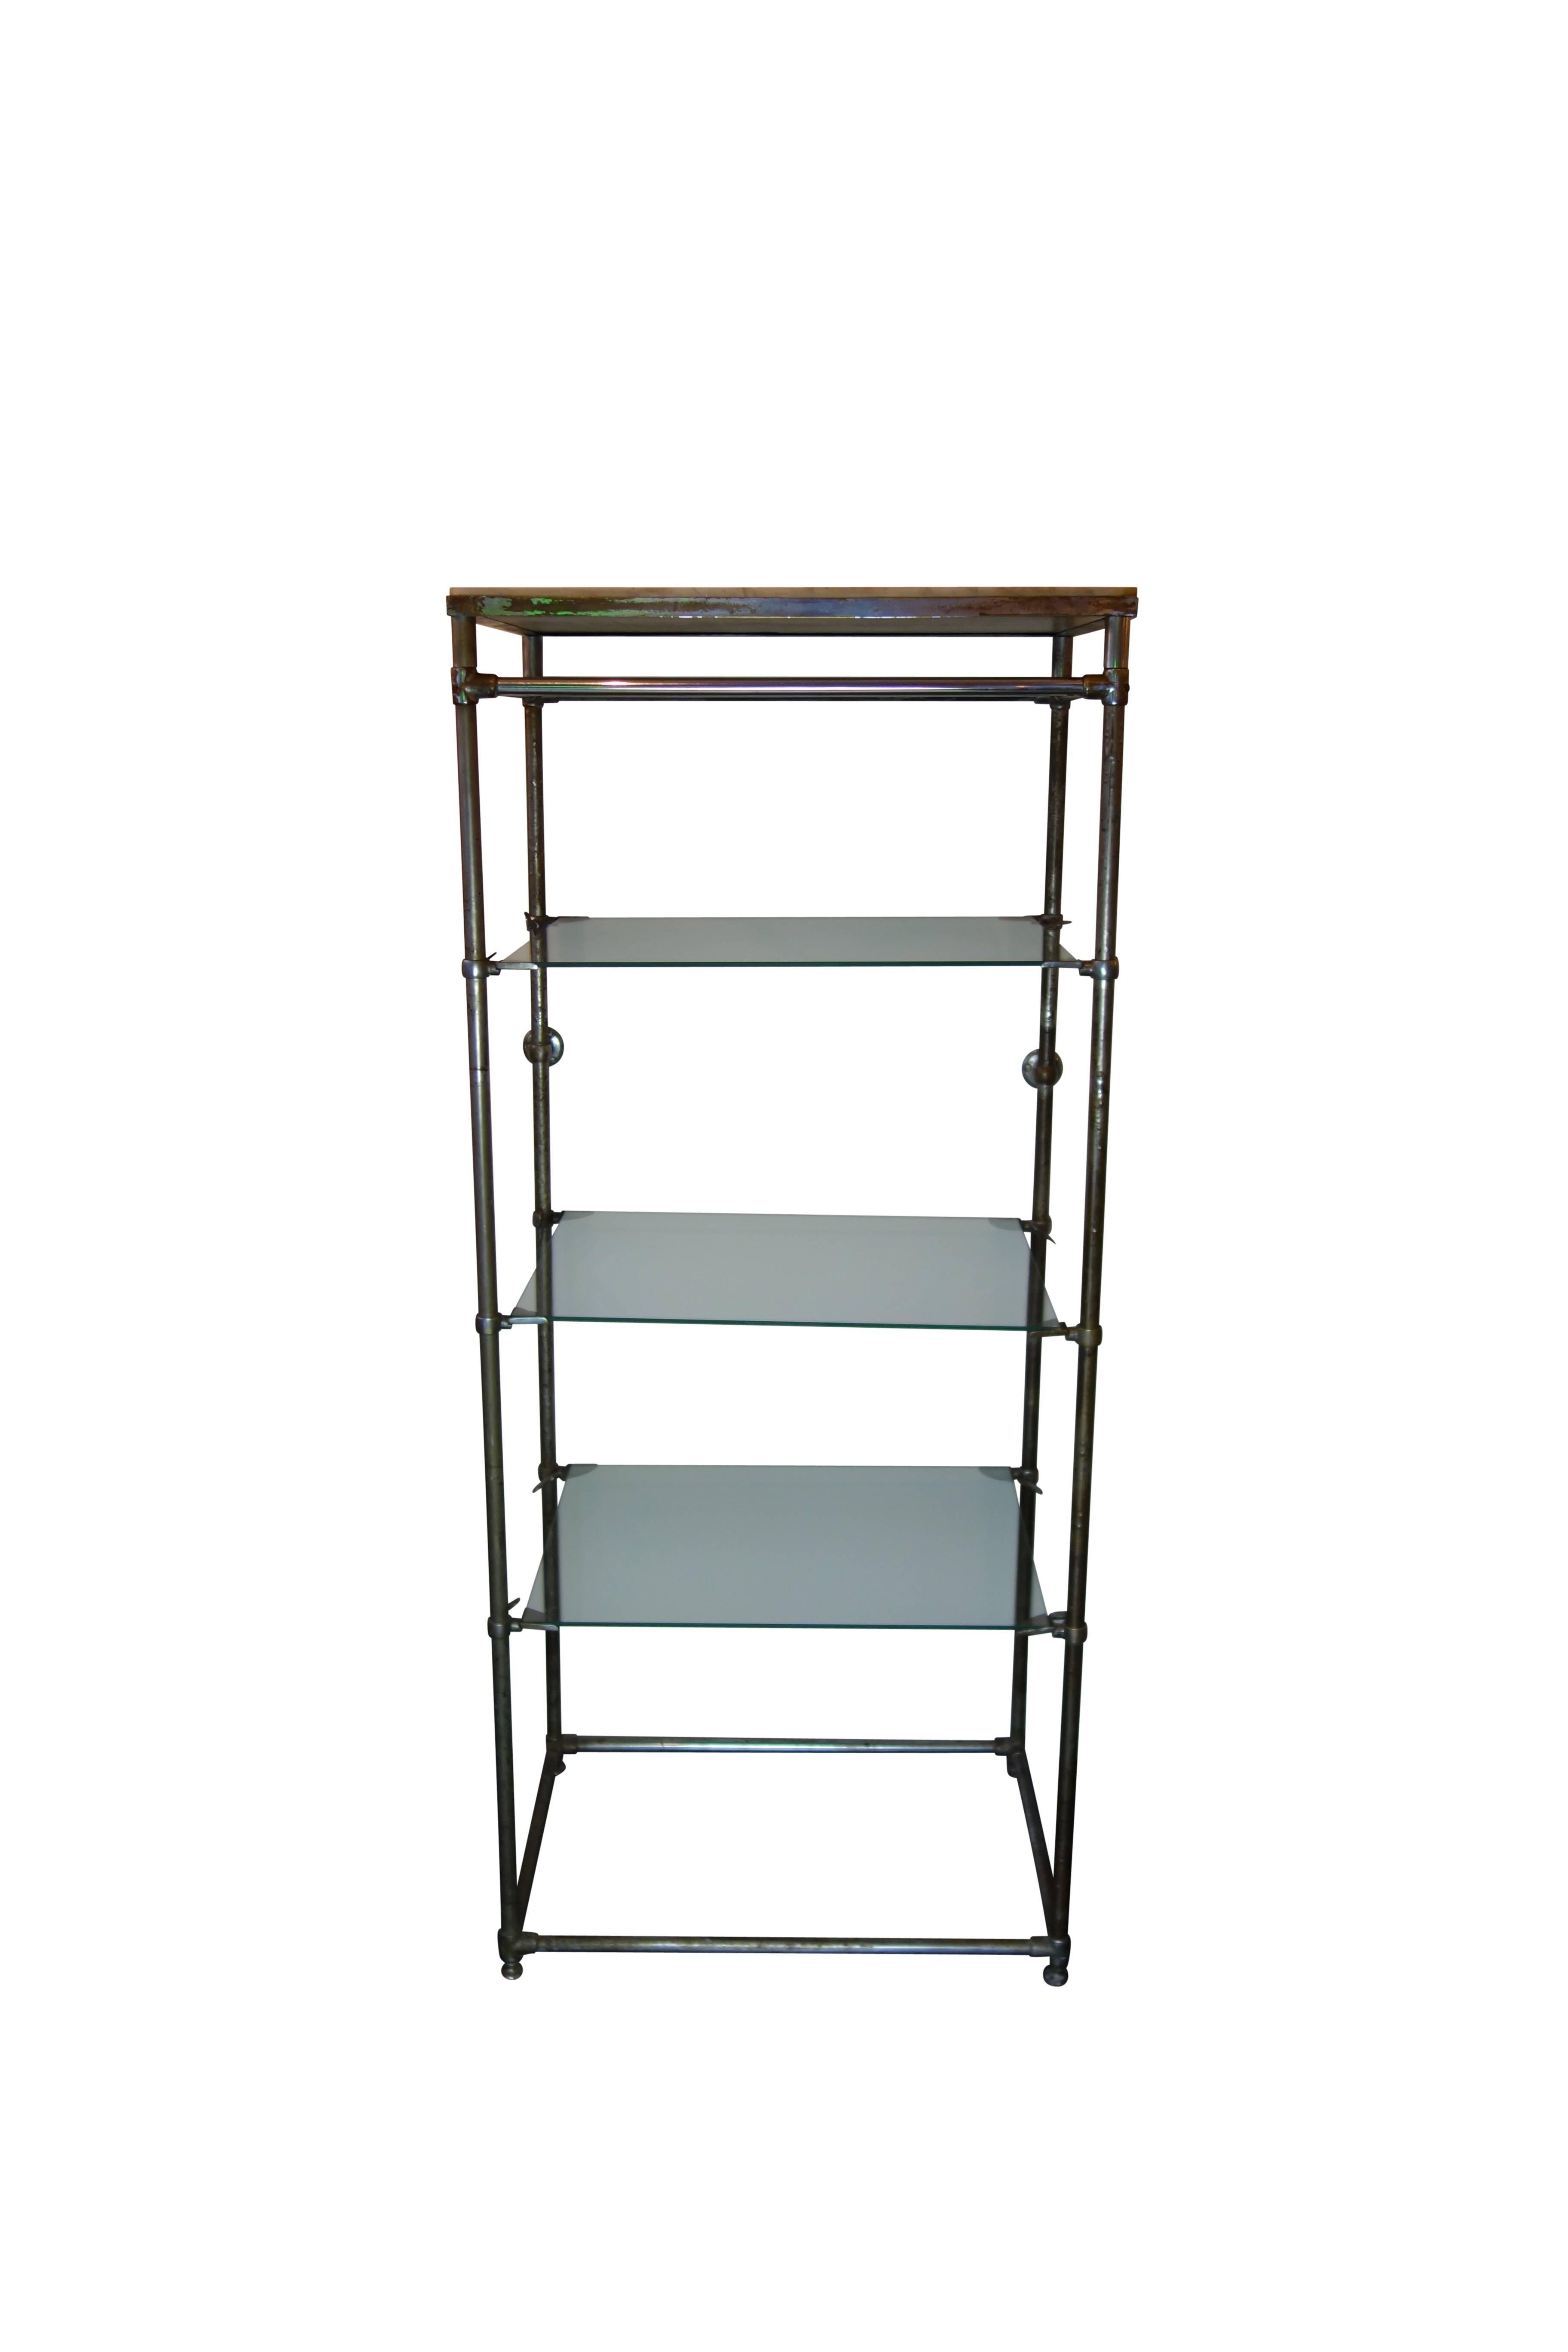 This is an Industrial style shelf with nickel plated brass frame, adjustable glass shelves, and marble top. Mounting hardware on the backside of the frame allows you to secure the piece to the wall. On the back is a label, made by Industria